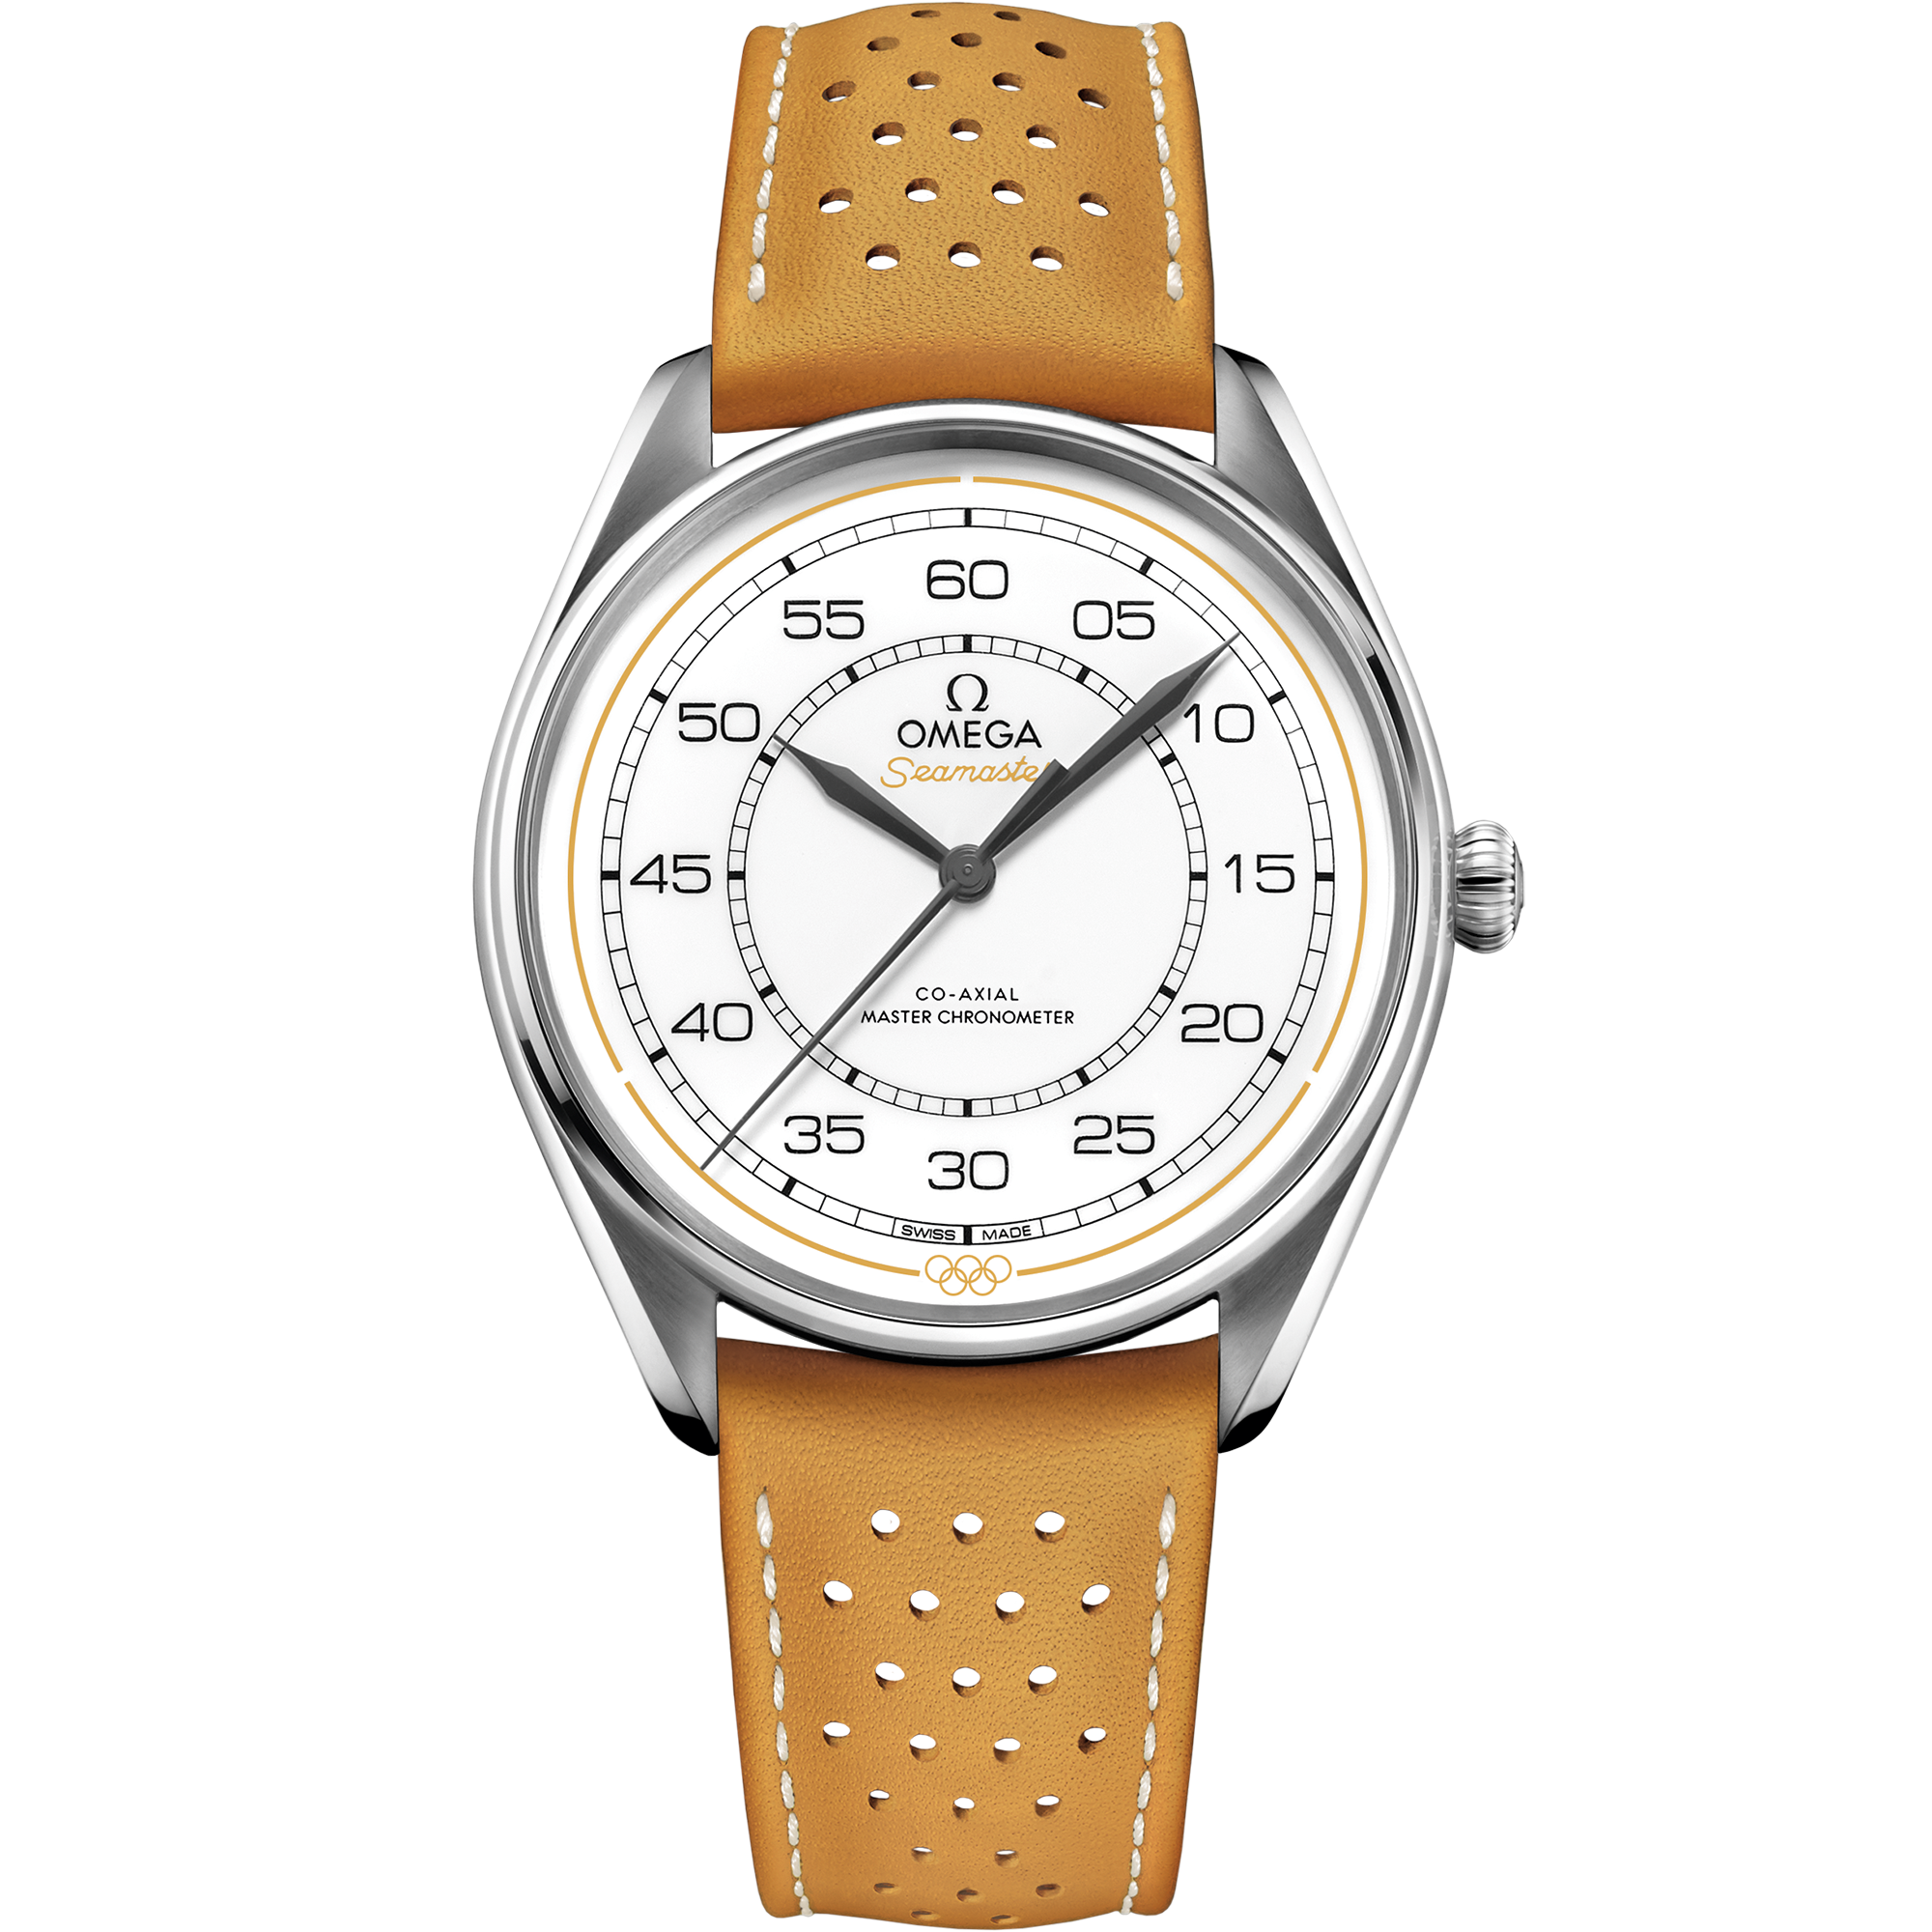 Seamaster Olympic Official Timekeeper 39.5 mm, steel on leather strap - 522.32.40.20.04.002